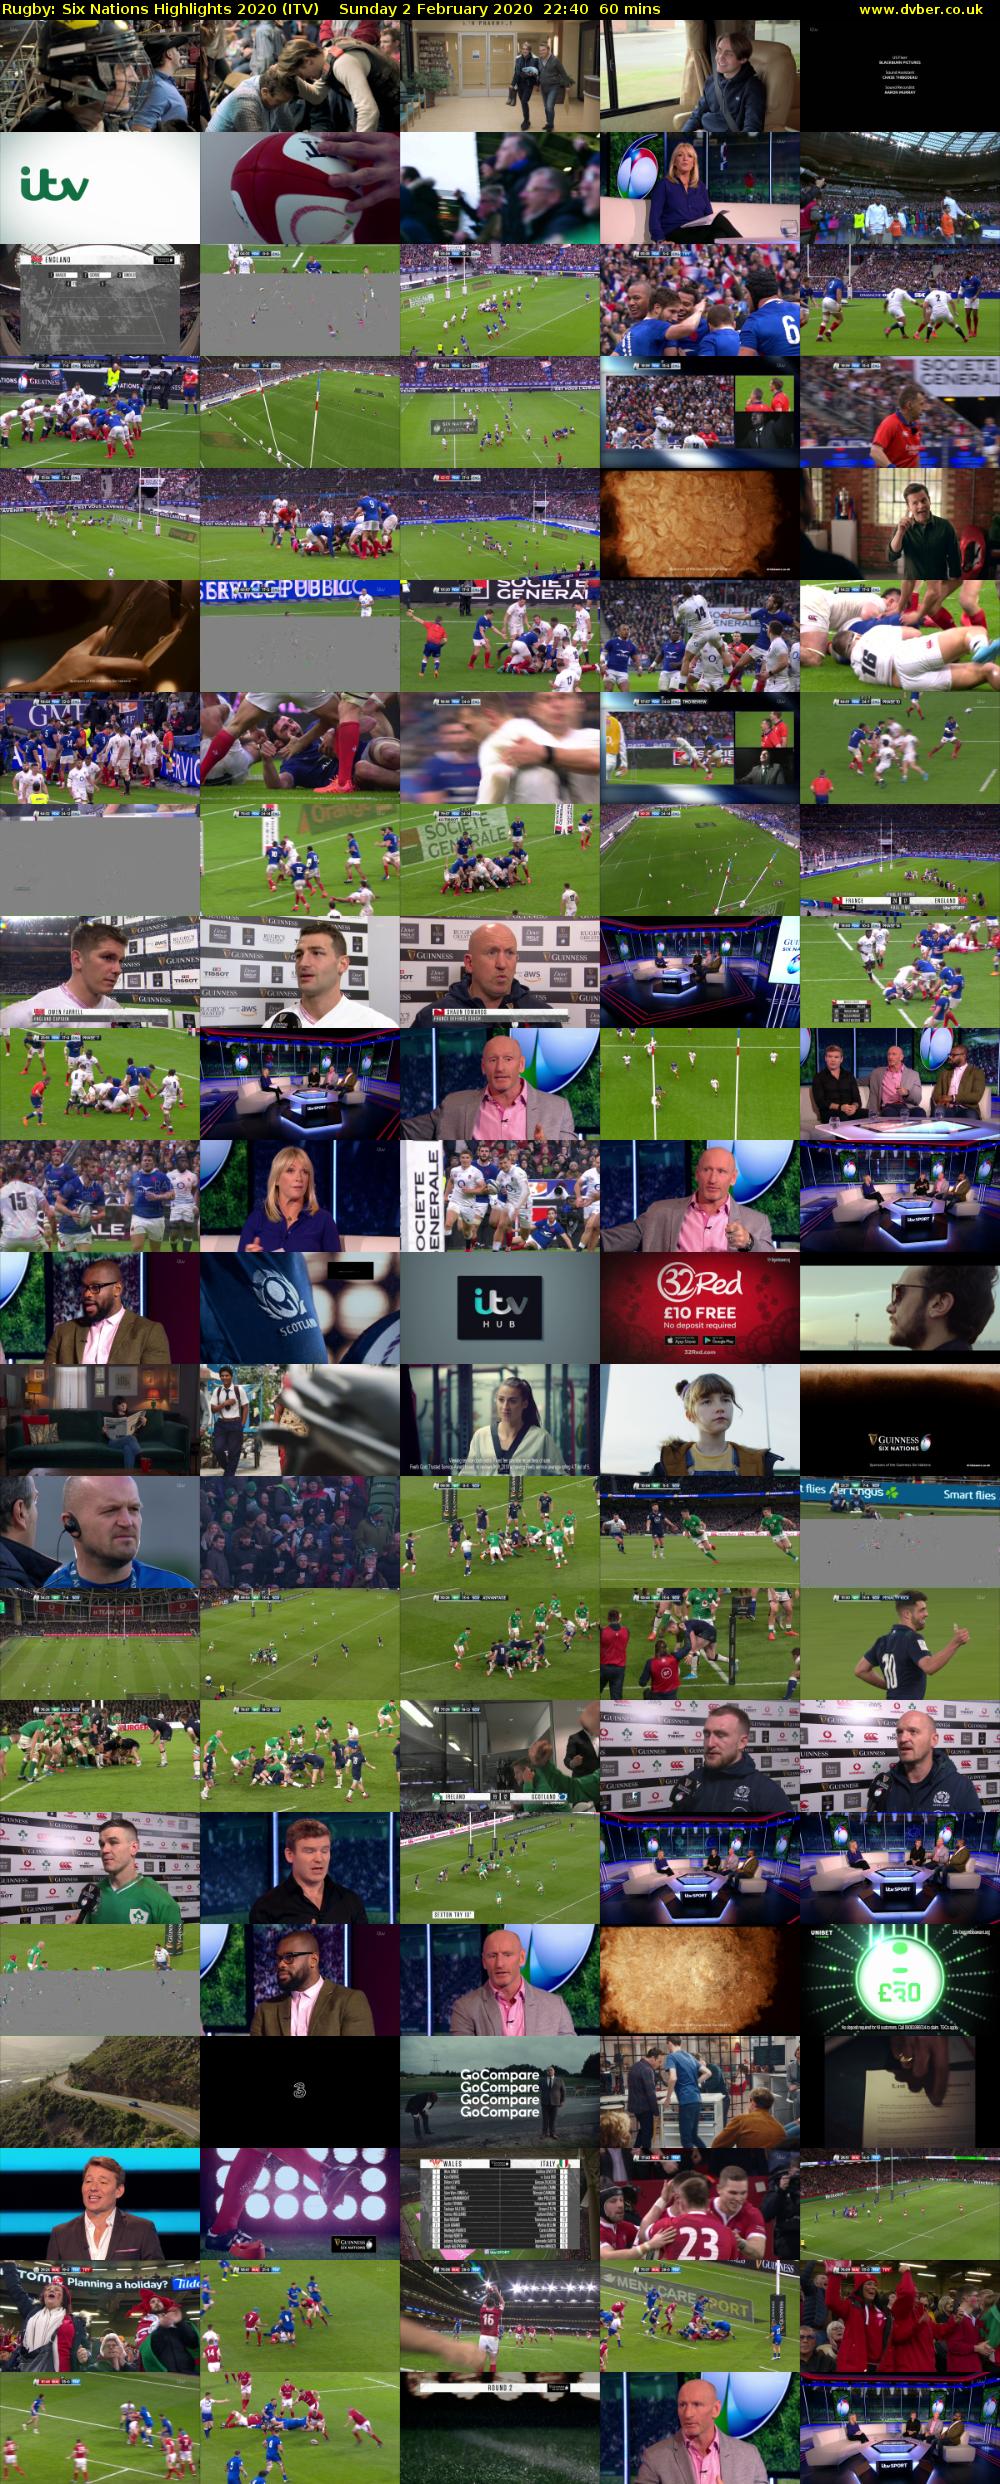 Rugby: Six Nations Highlights 2020 (ITV) Sunday 2 February 2020 22:40 - 23:40